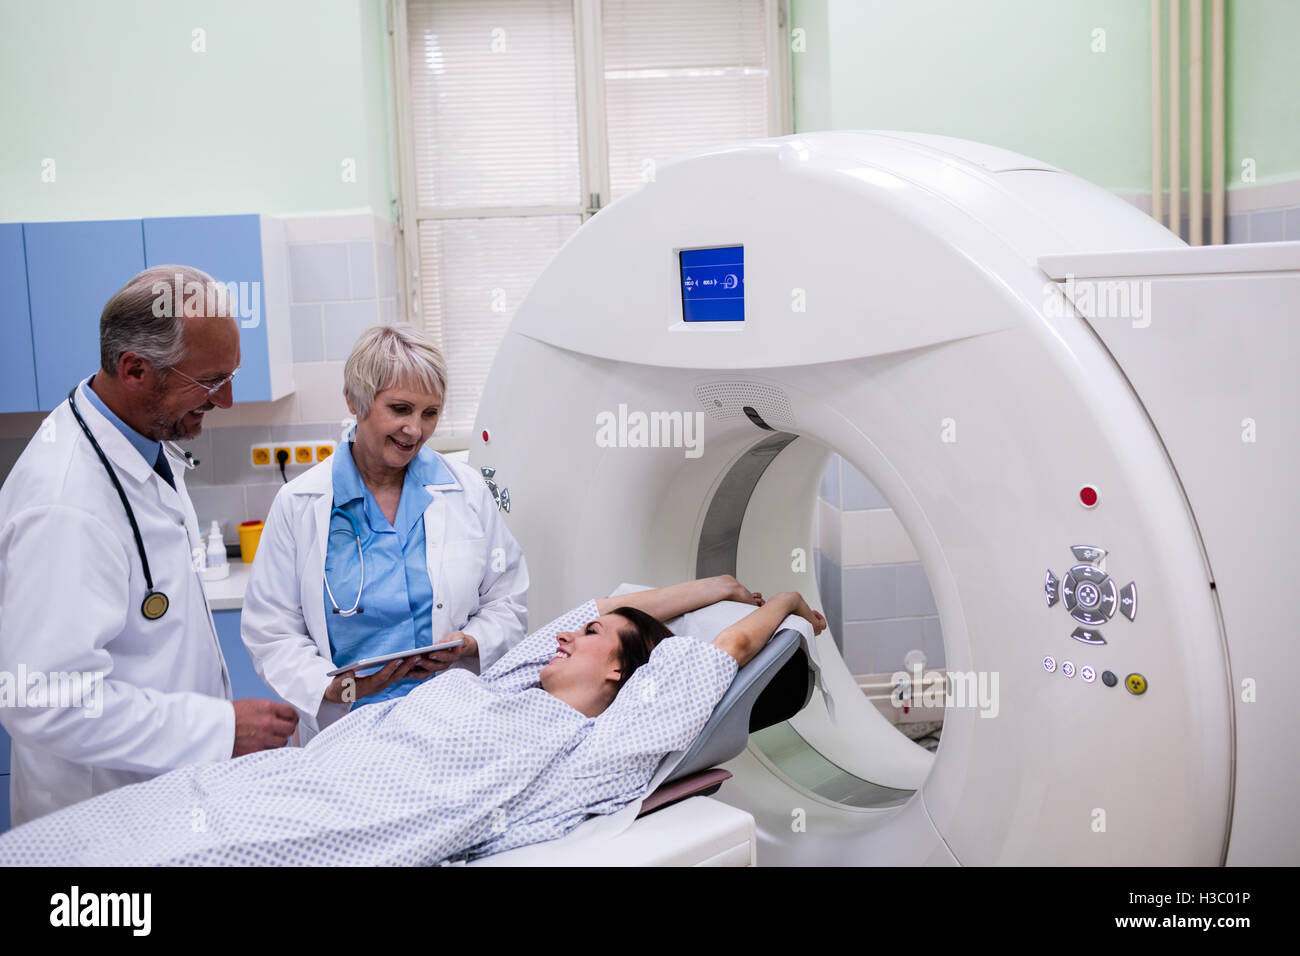 Doctors interacting with patient in scanning room Stock Photo